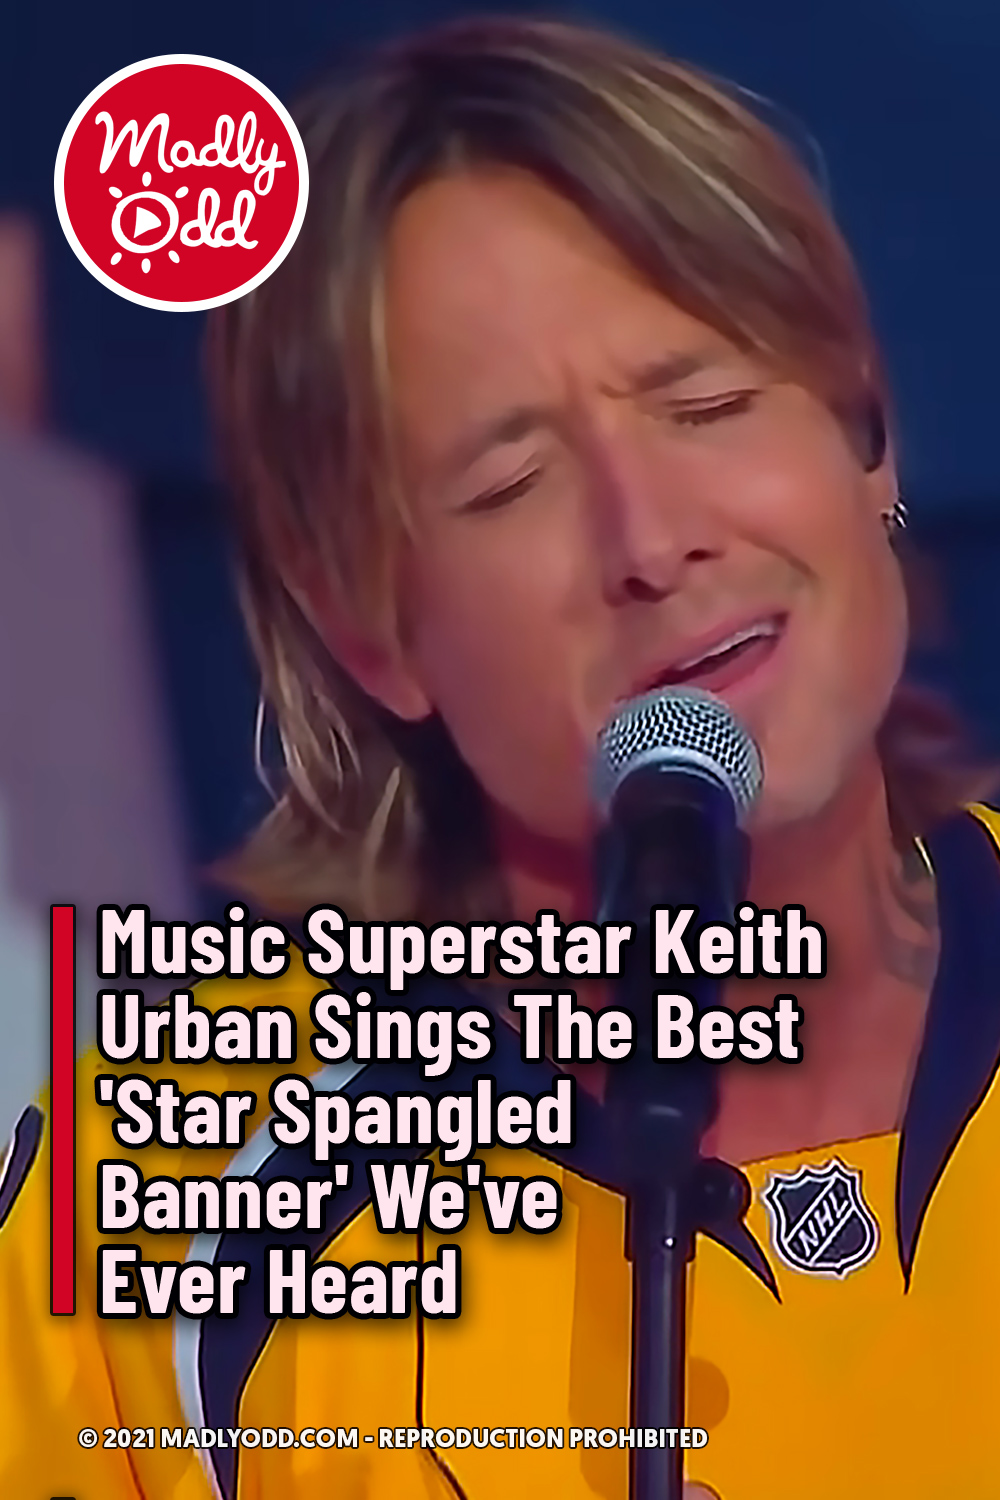 Music Superstar Keith Urban Sings The Best \'Star Spangled Banner\' We\'ve Ever Heard